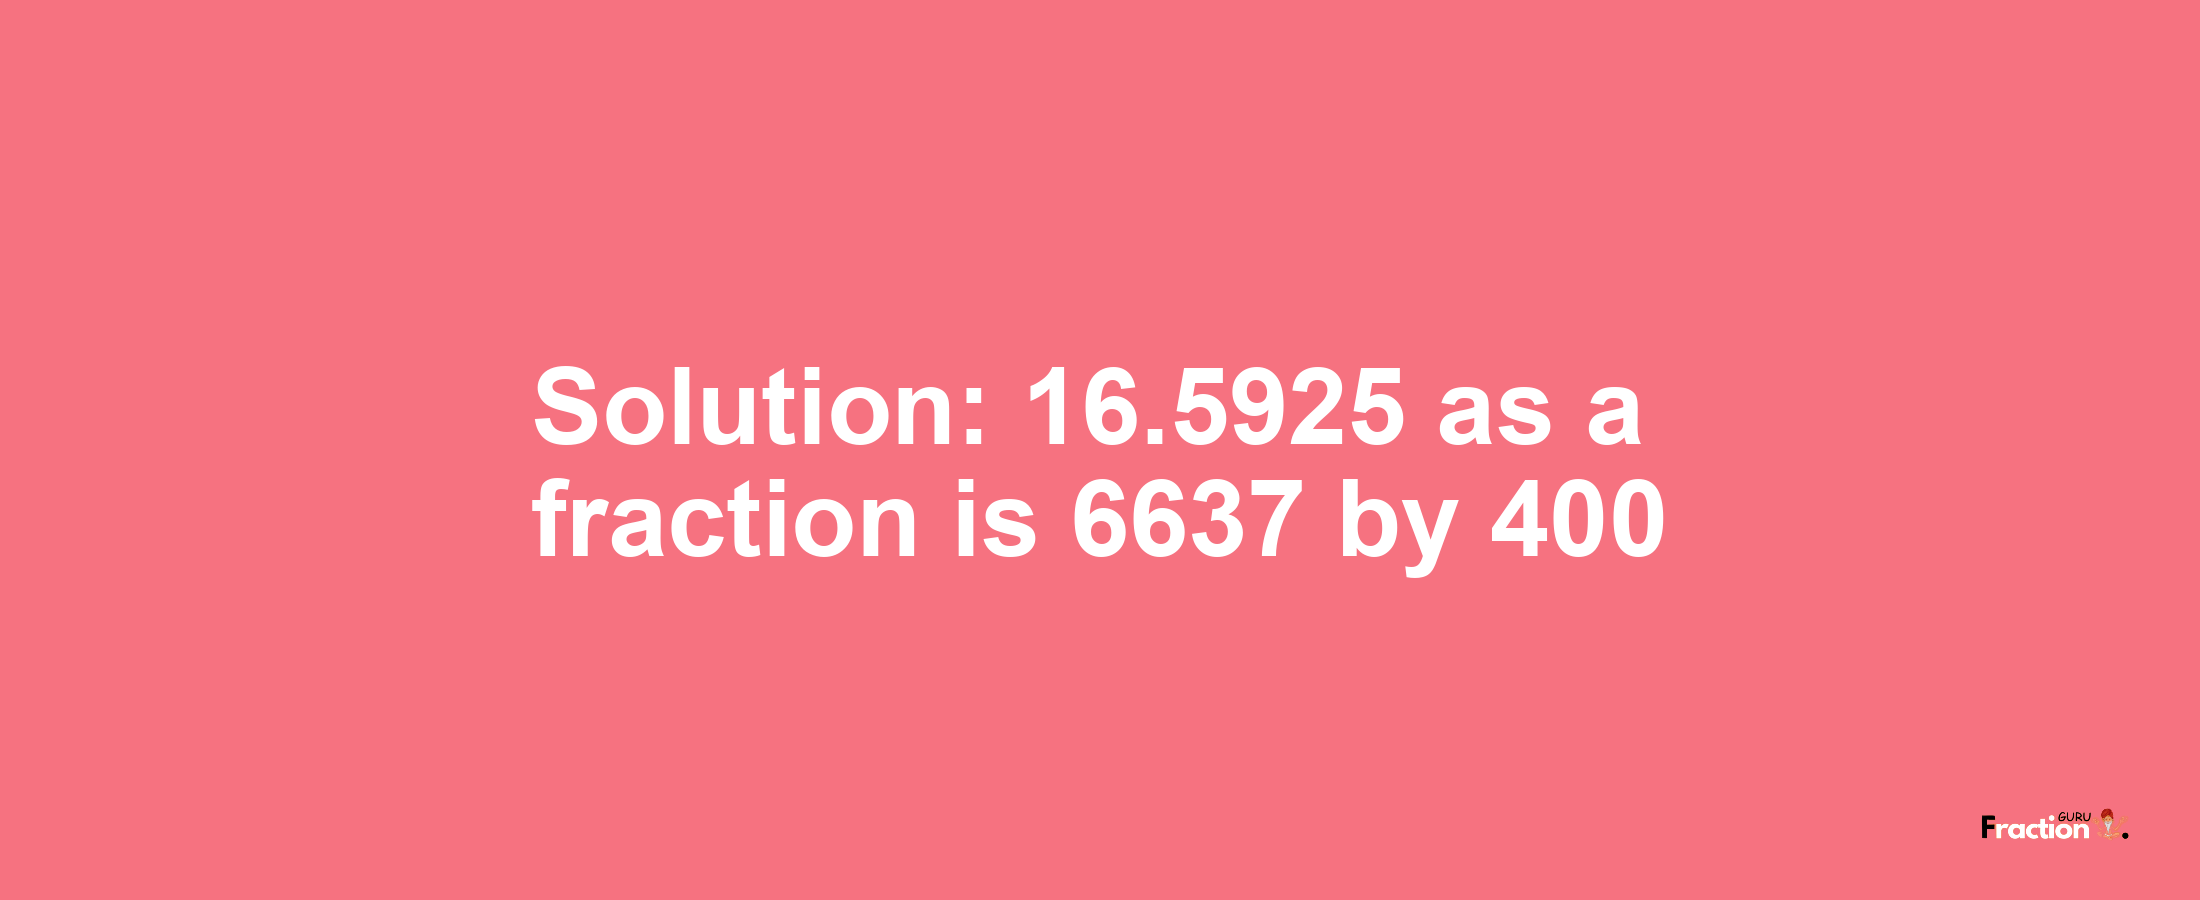 Solution:16.5925 as a fraction is 6637/400